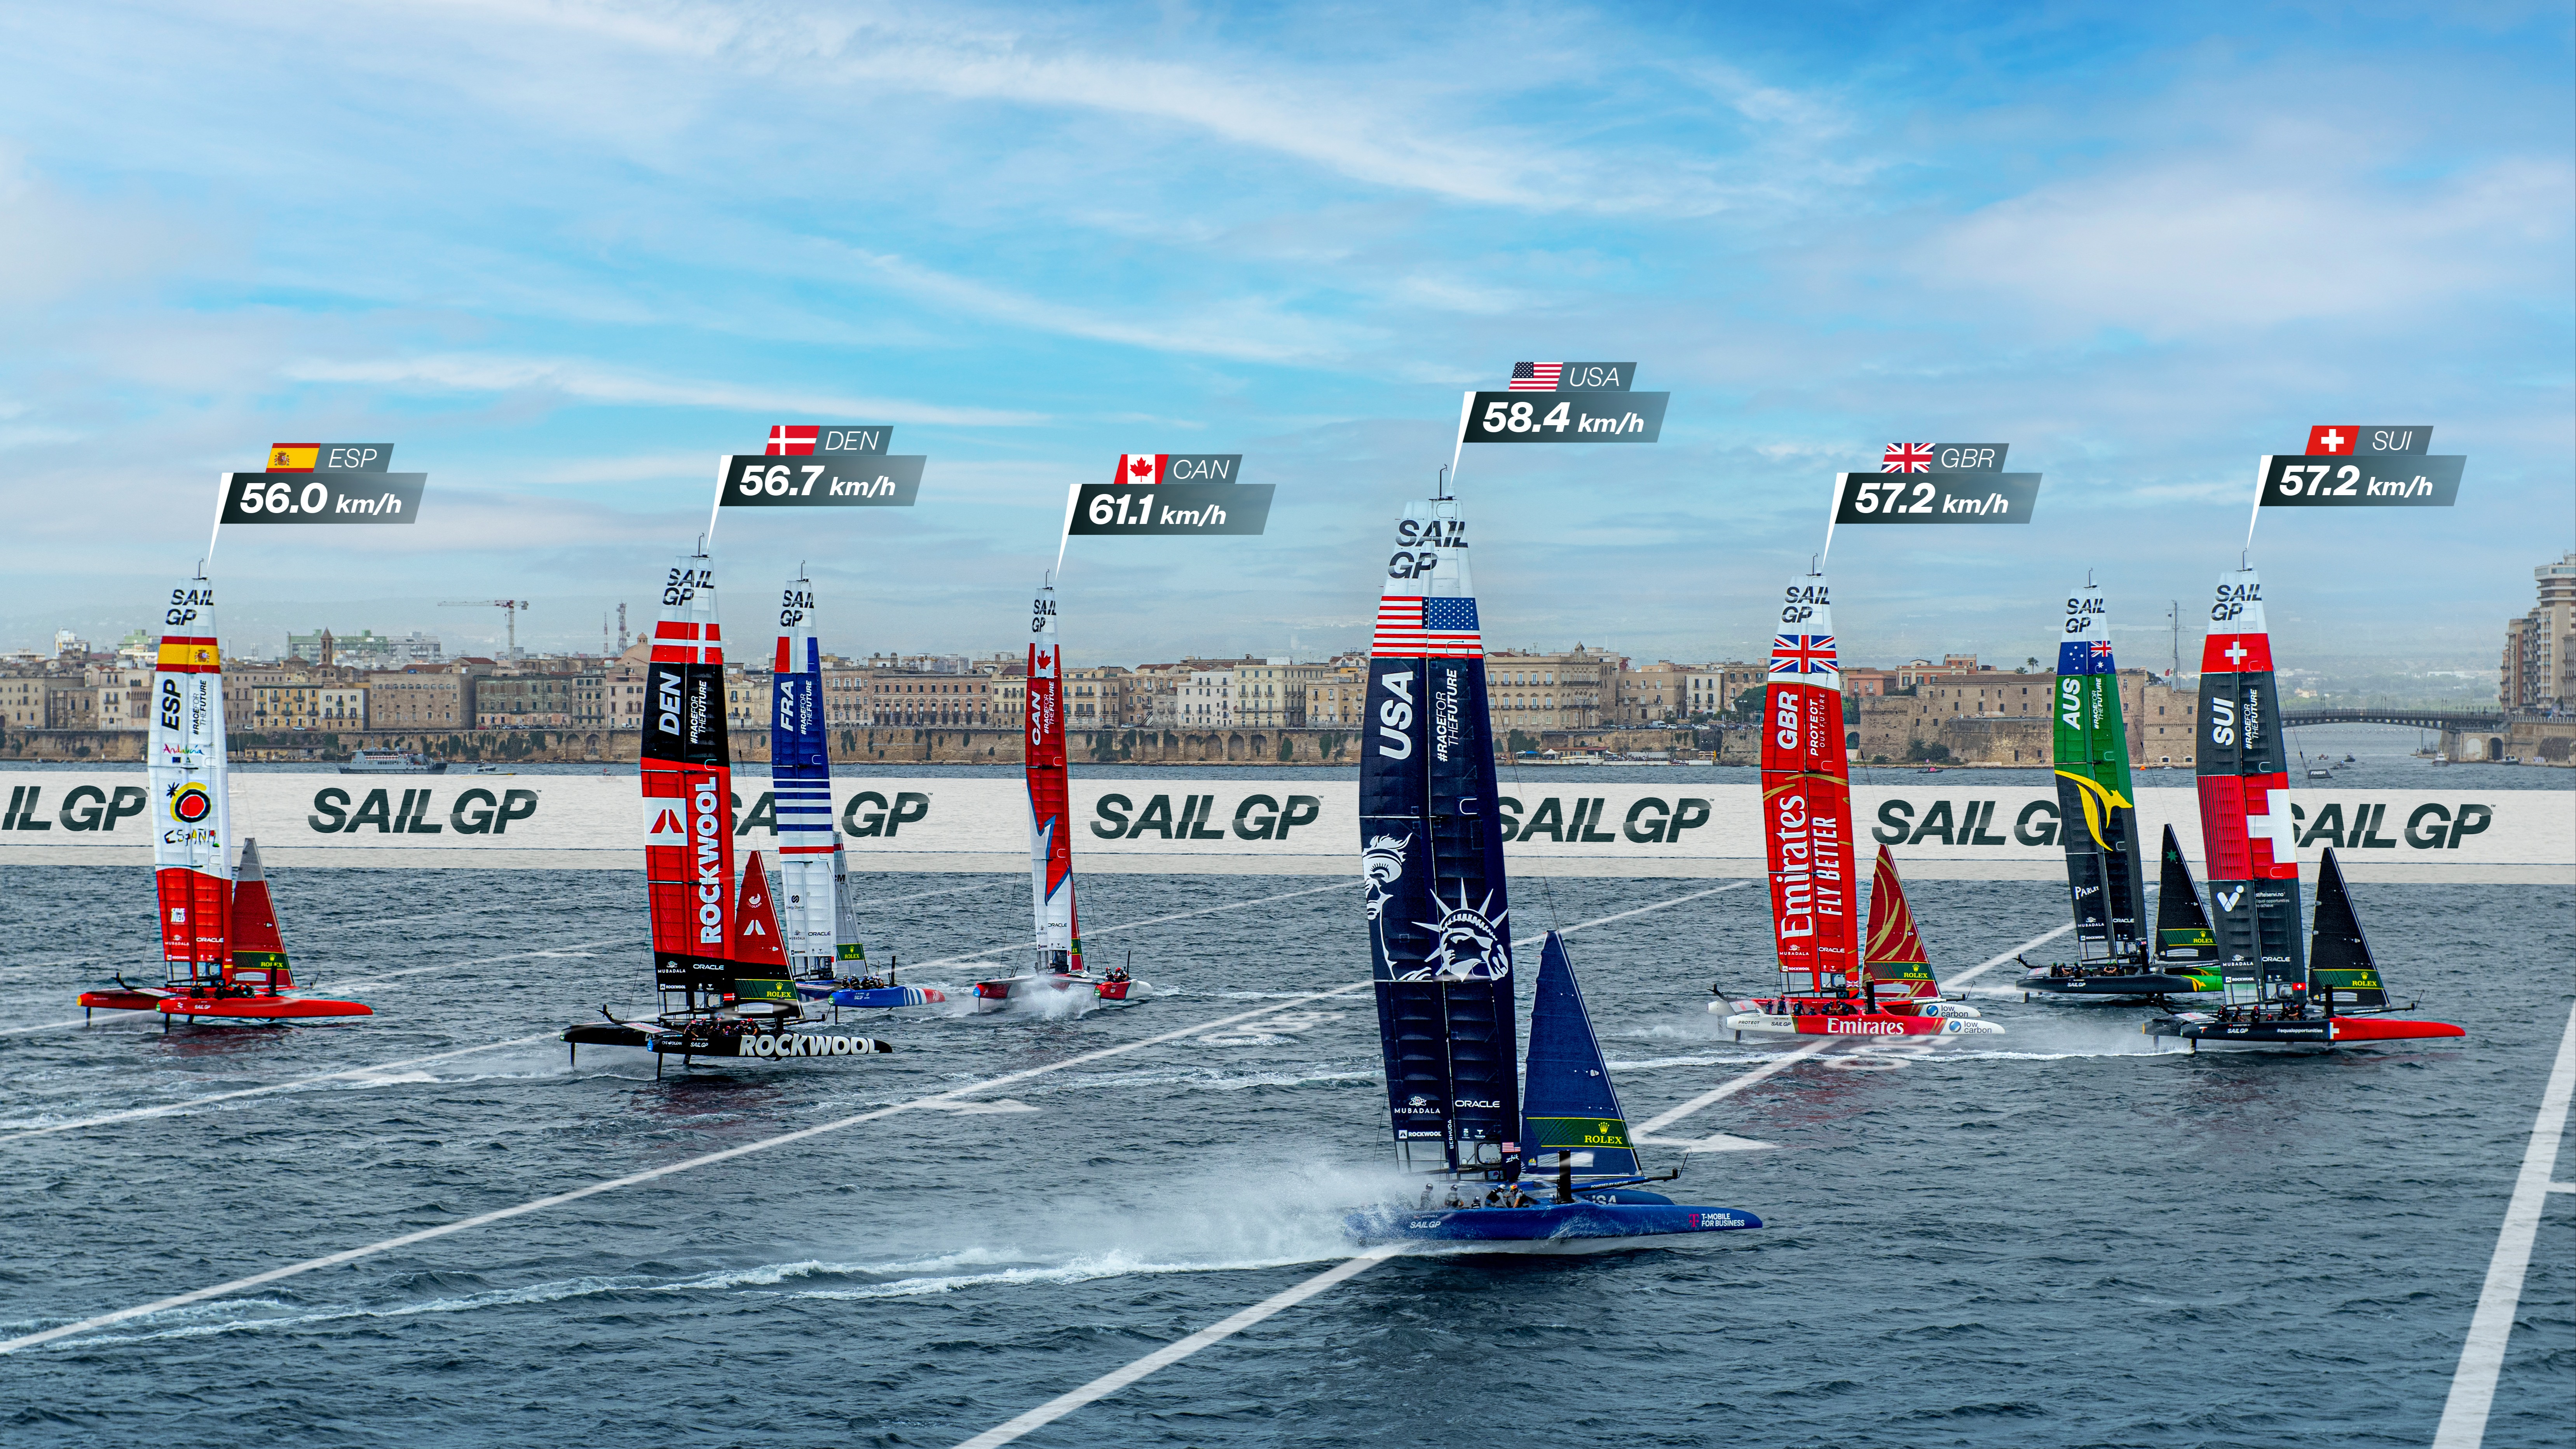 Season 4 // USA leads the fleet in Italy with LiveLine graphics